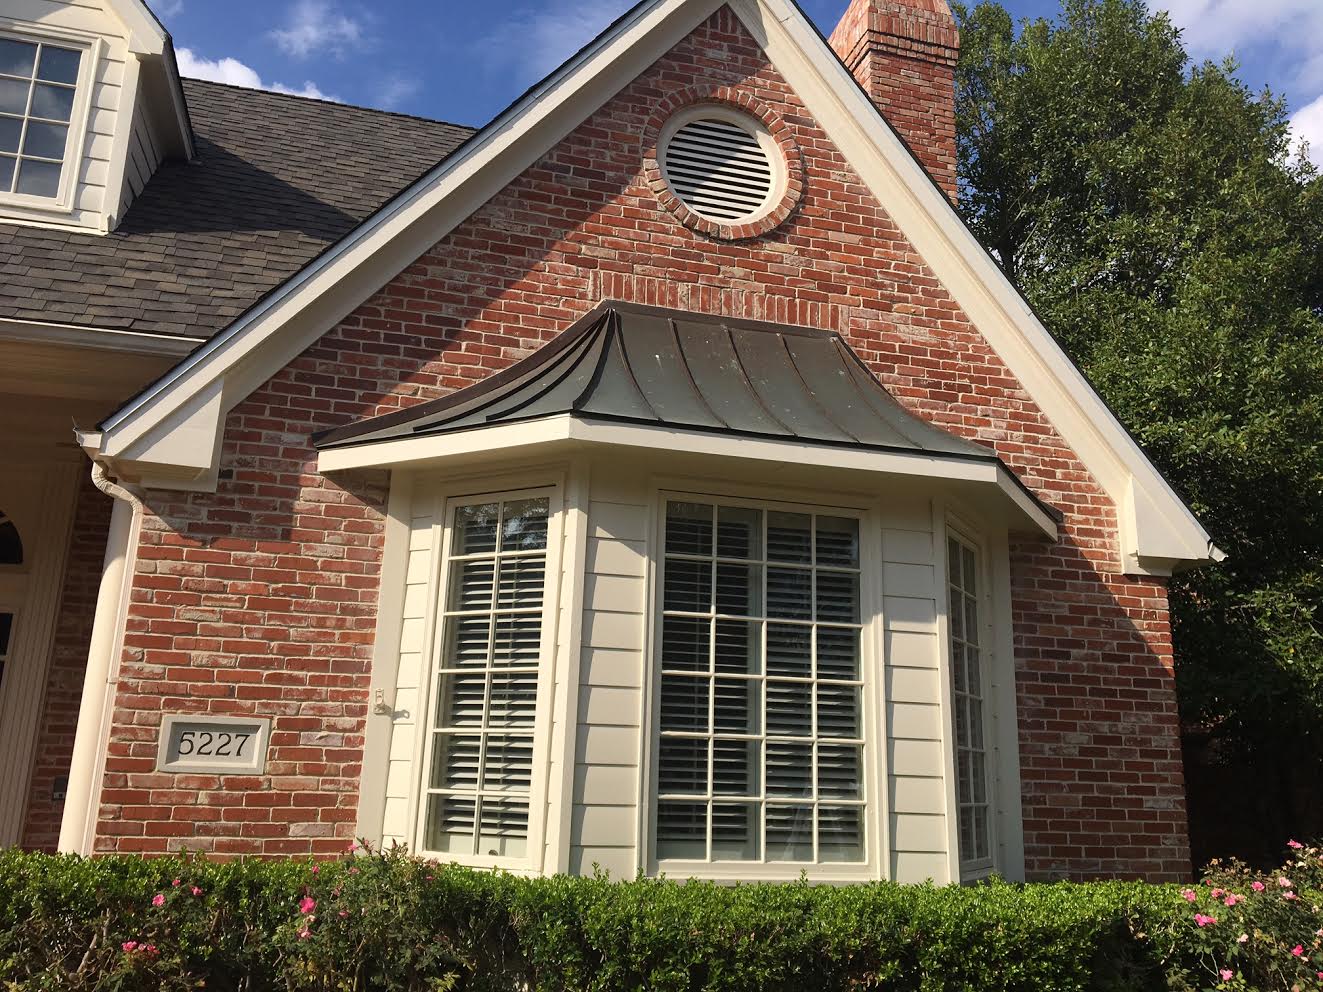 irongeate-roofing-north-texas-roofing-roof-company